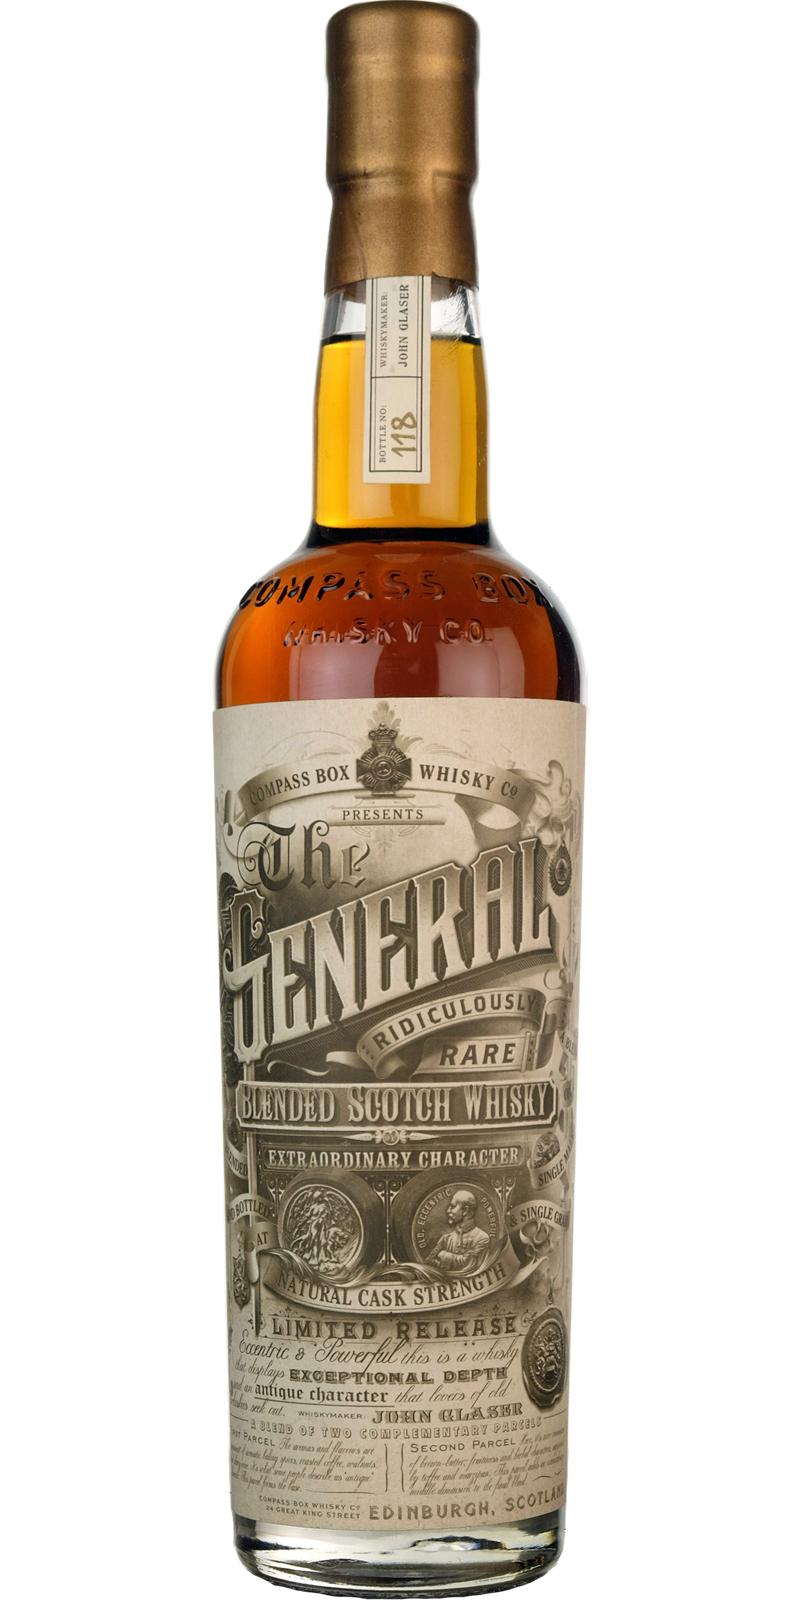 Compass Box The General